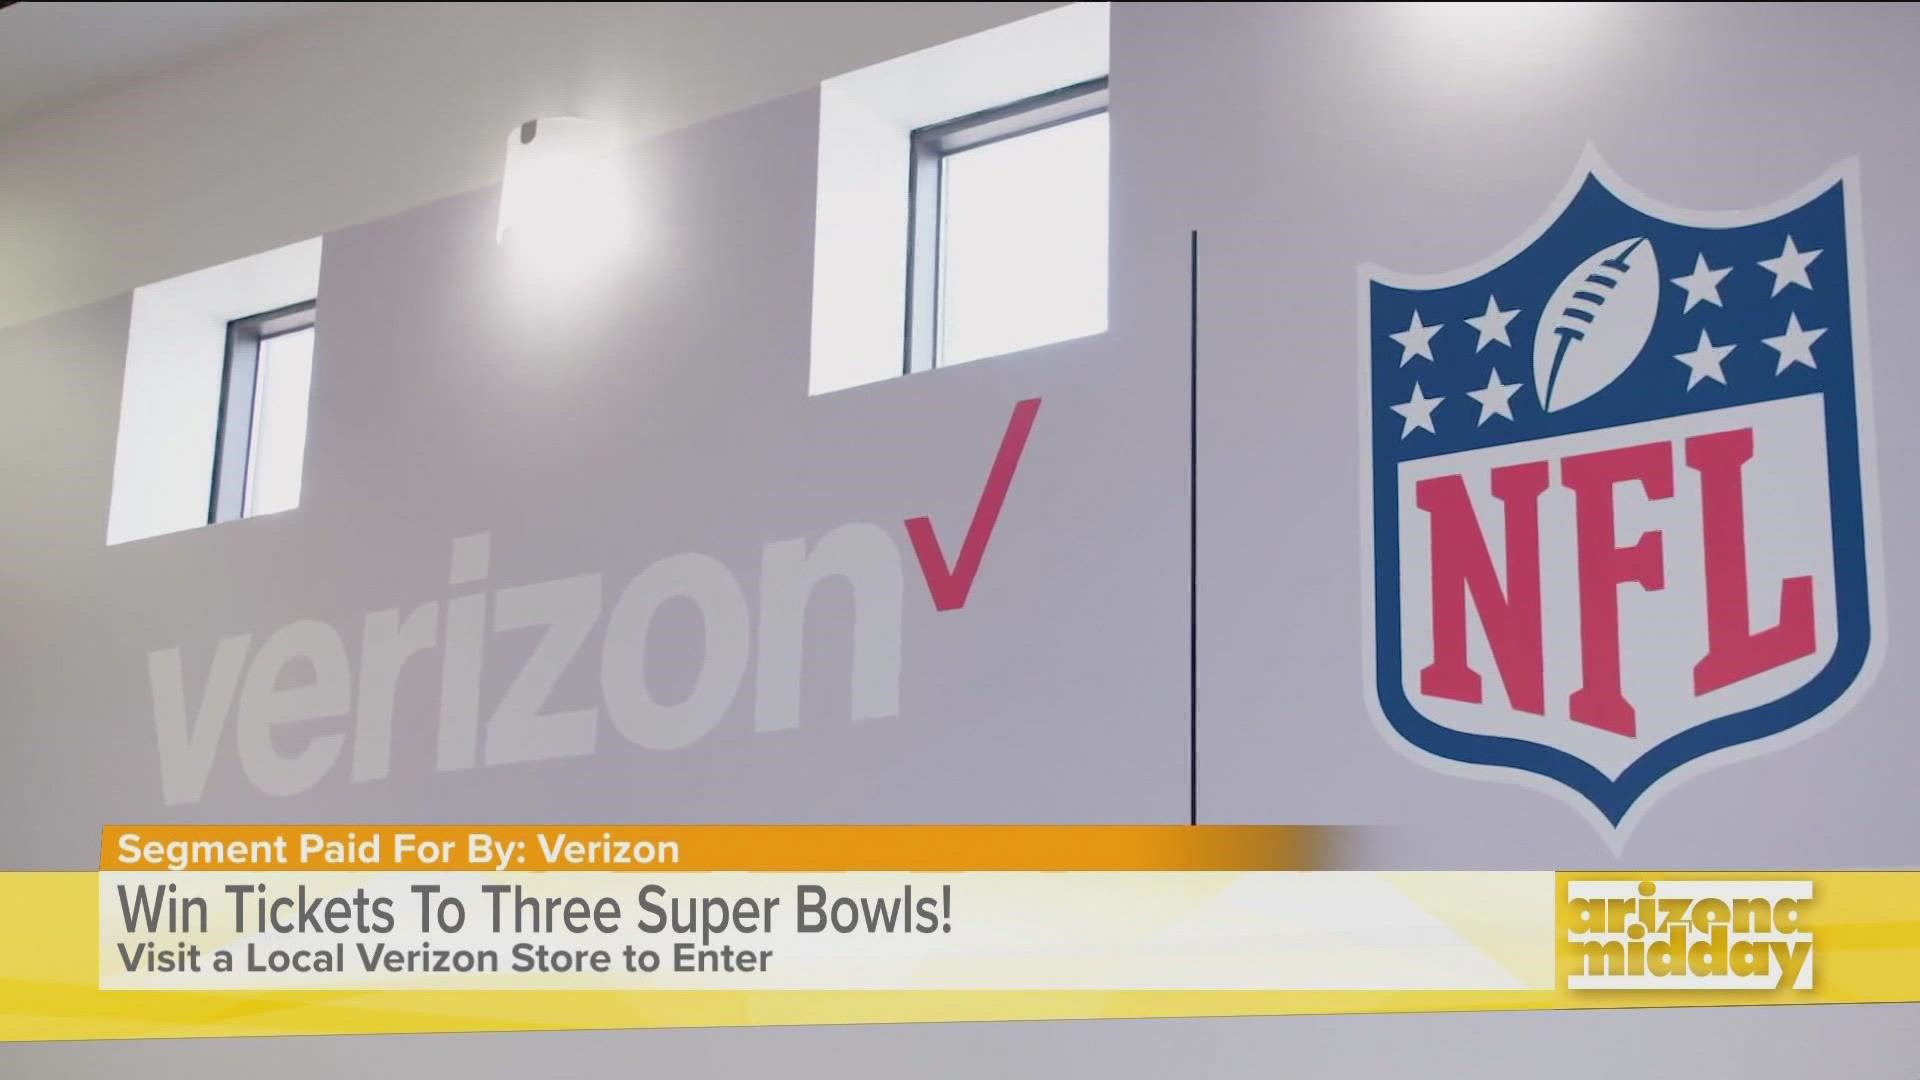 Two-time Super Bowl champion Eli Manning and Verizon share the inside scoop on how football fans can win tickets to three consecutive Super Bowl games!